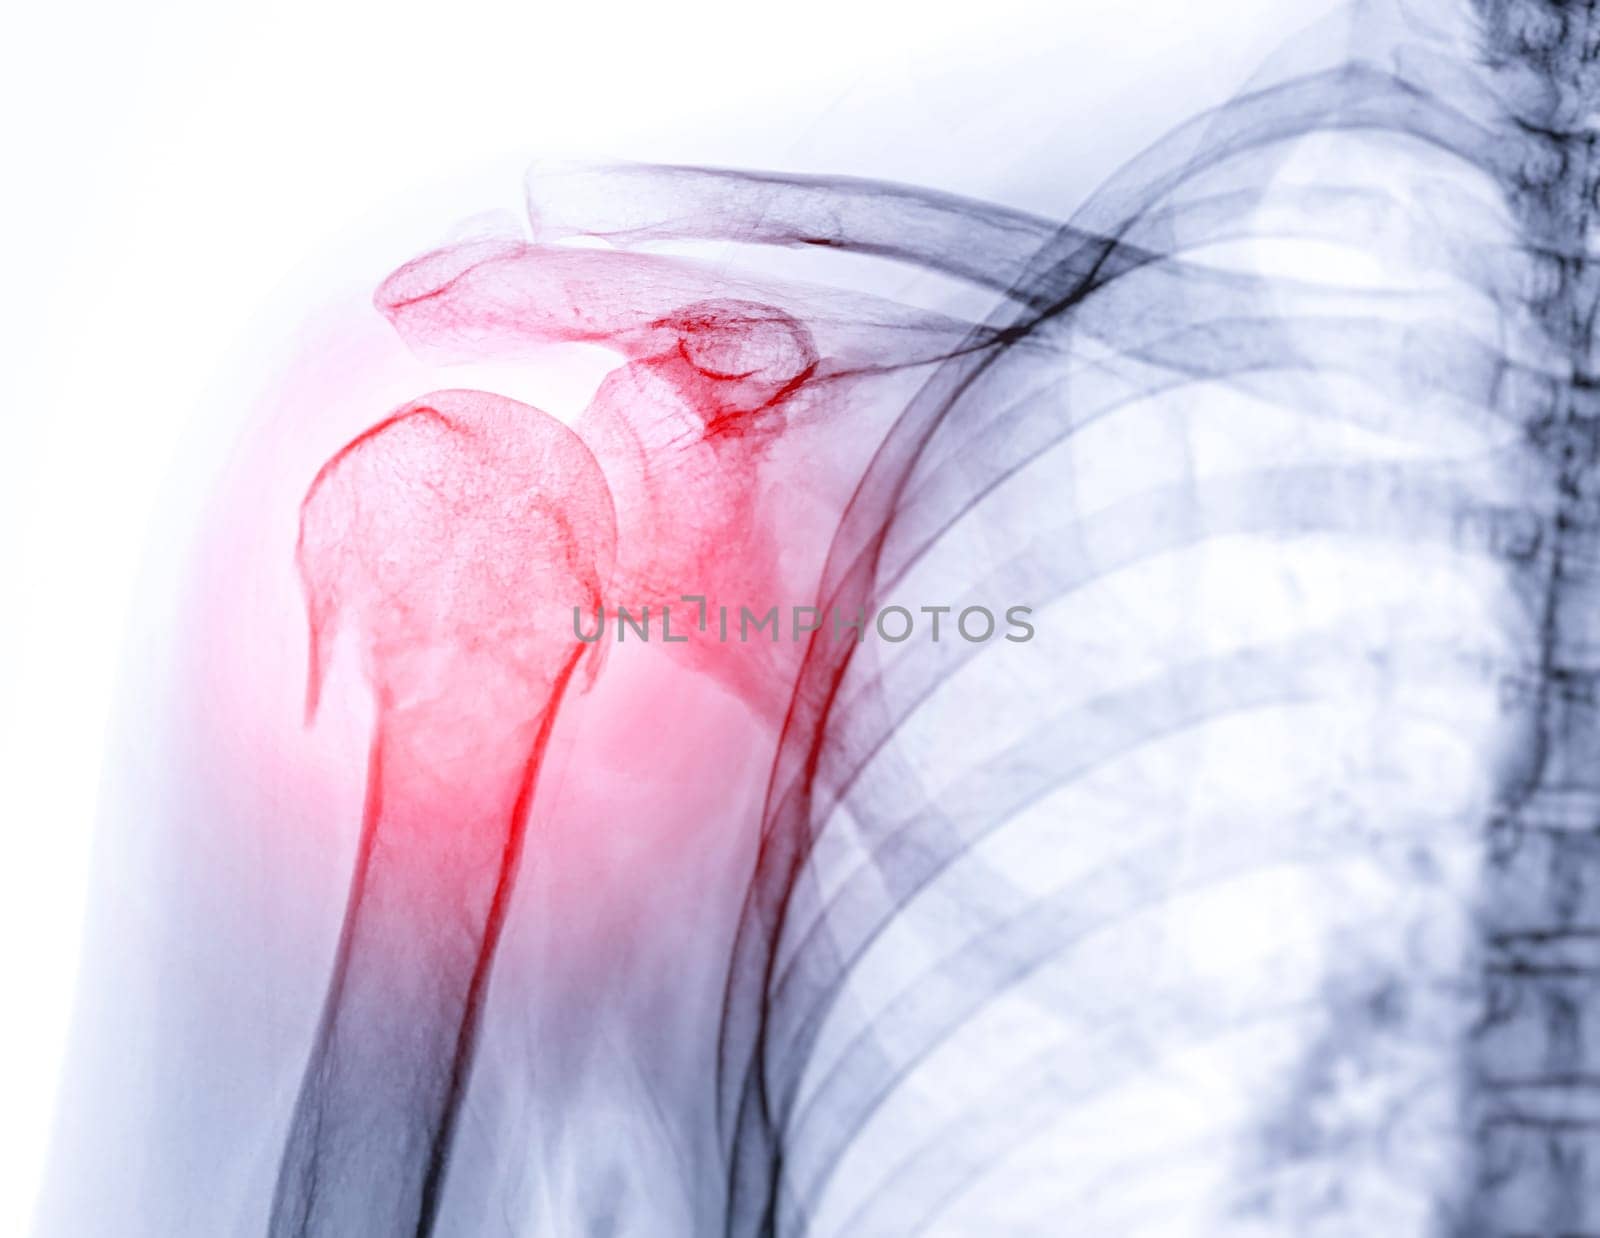 X-ray of Shoulder joint  showing fracture of humerus bone.